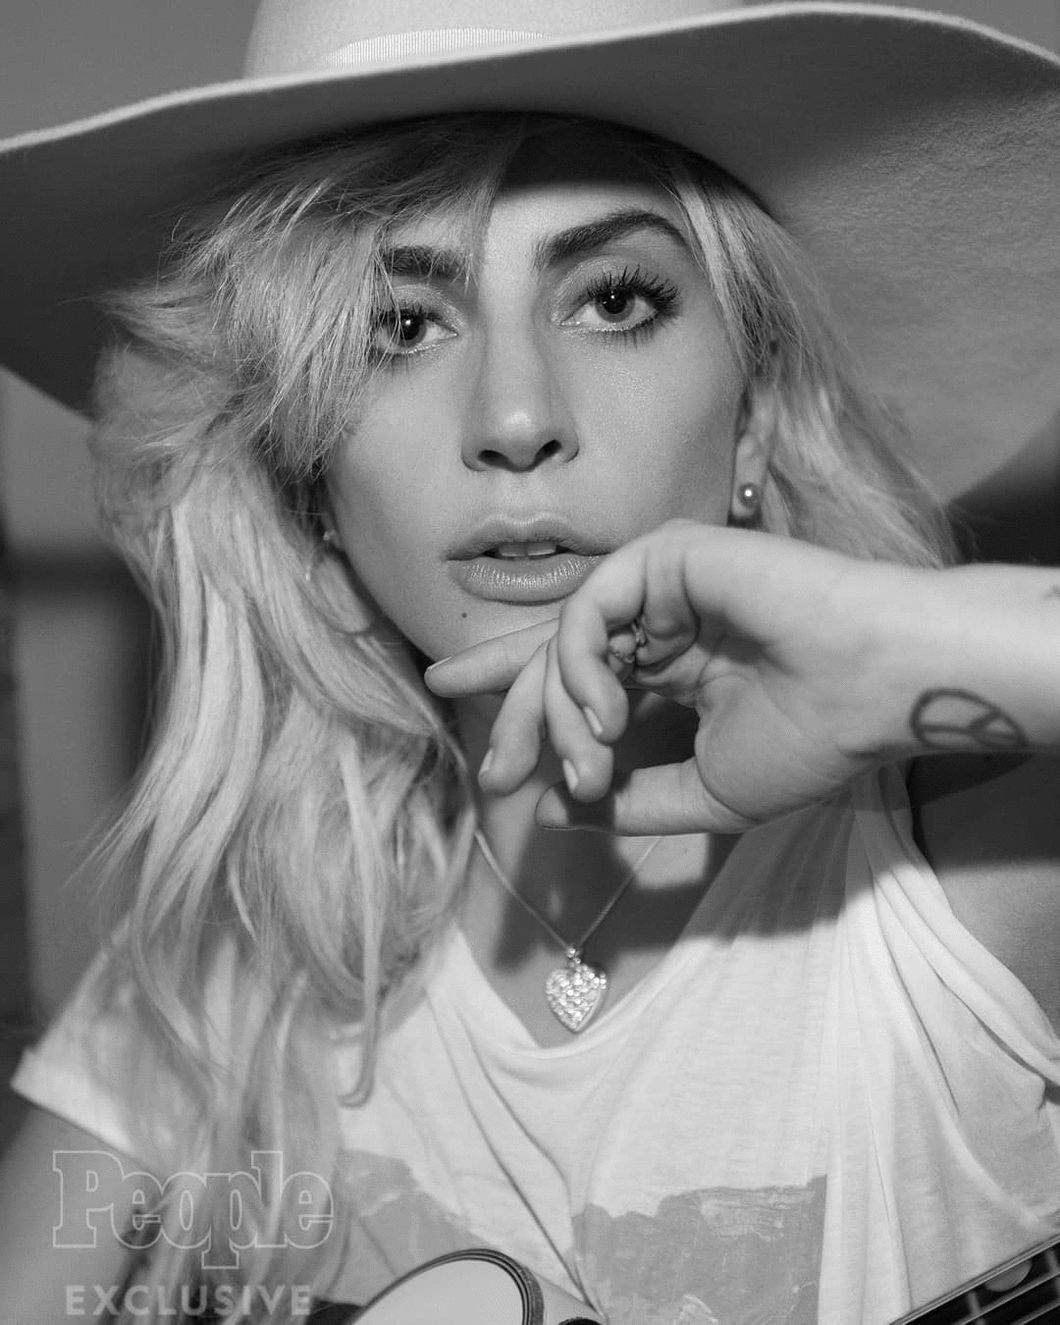 25 Genuine Quotes That Prove Lady Gaga Is One Of The Most Inspirational Artists